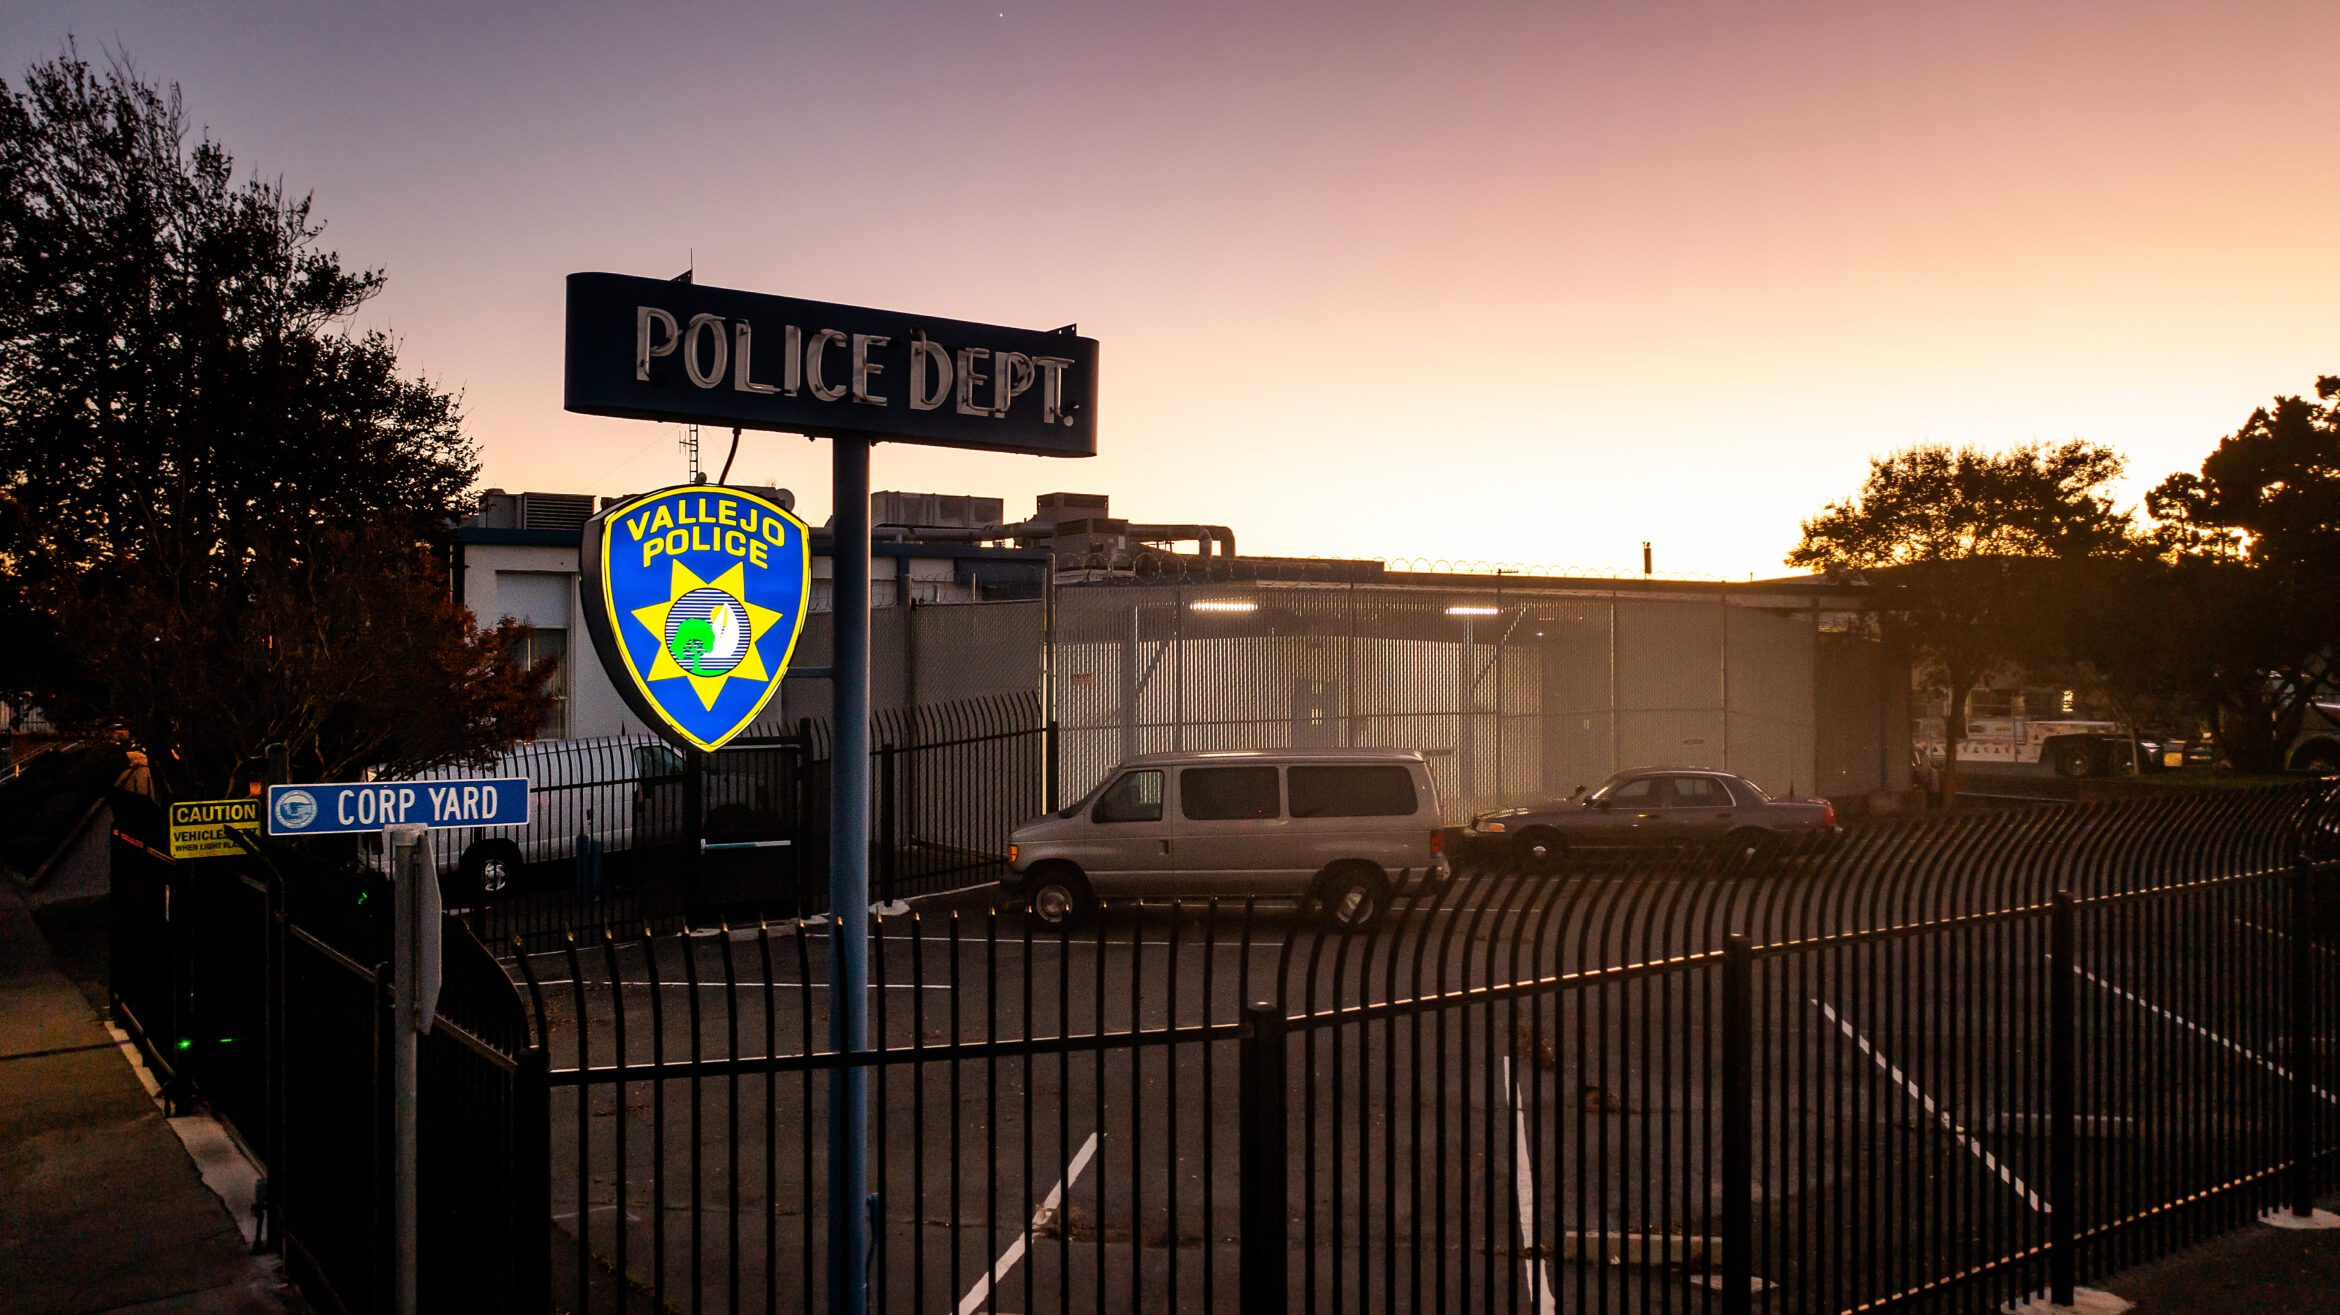 The Vallejo Police Department sign at dusk.